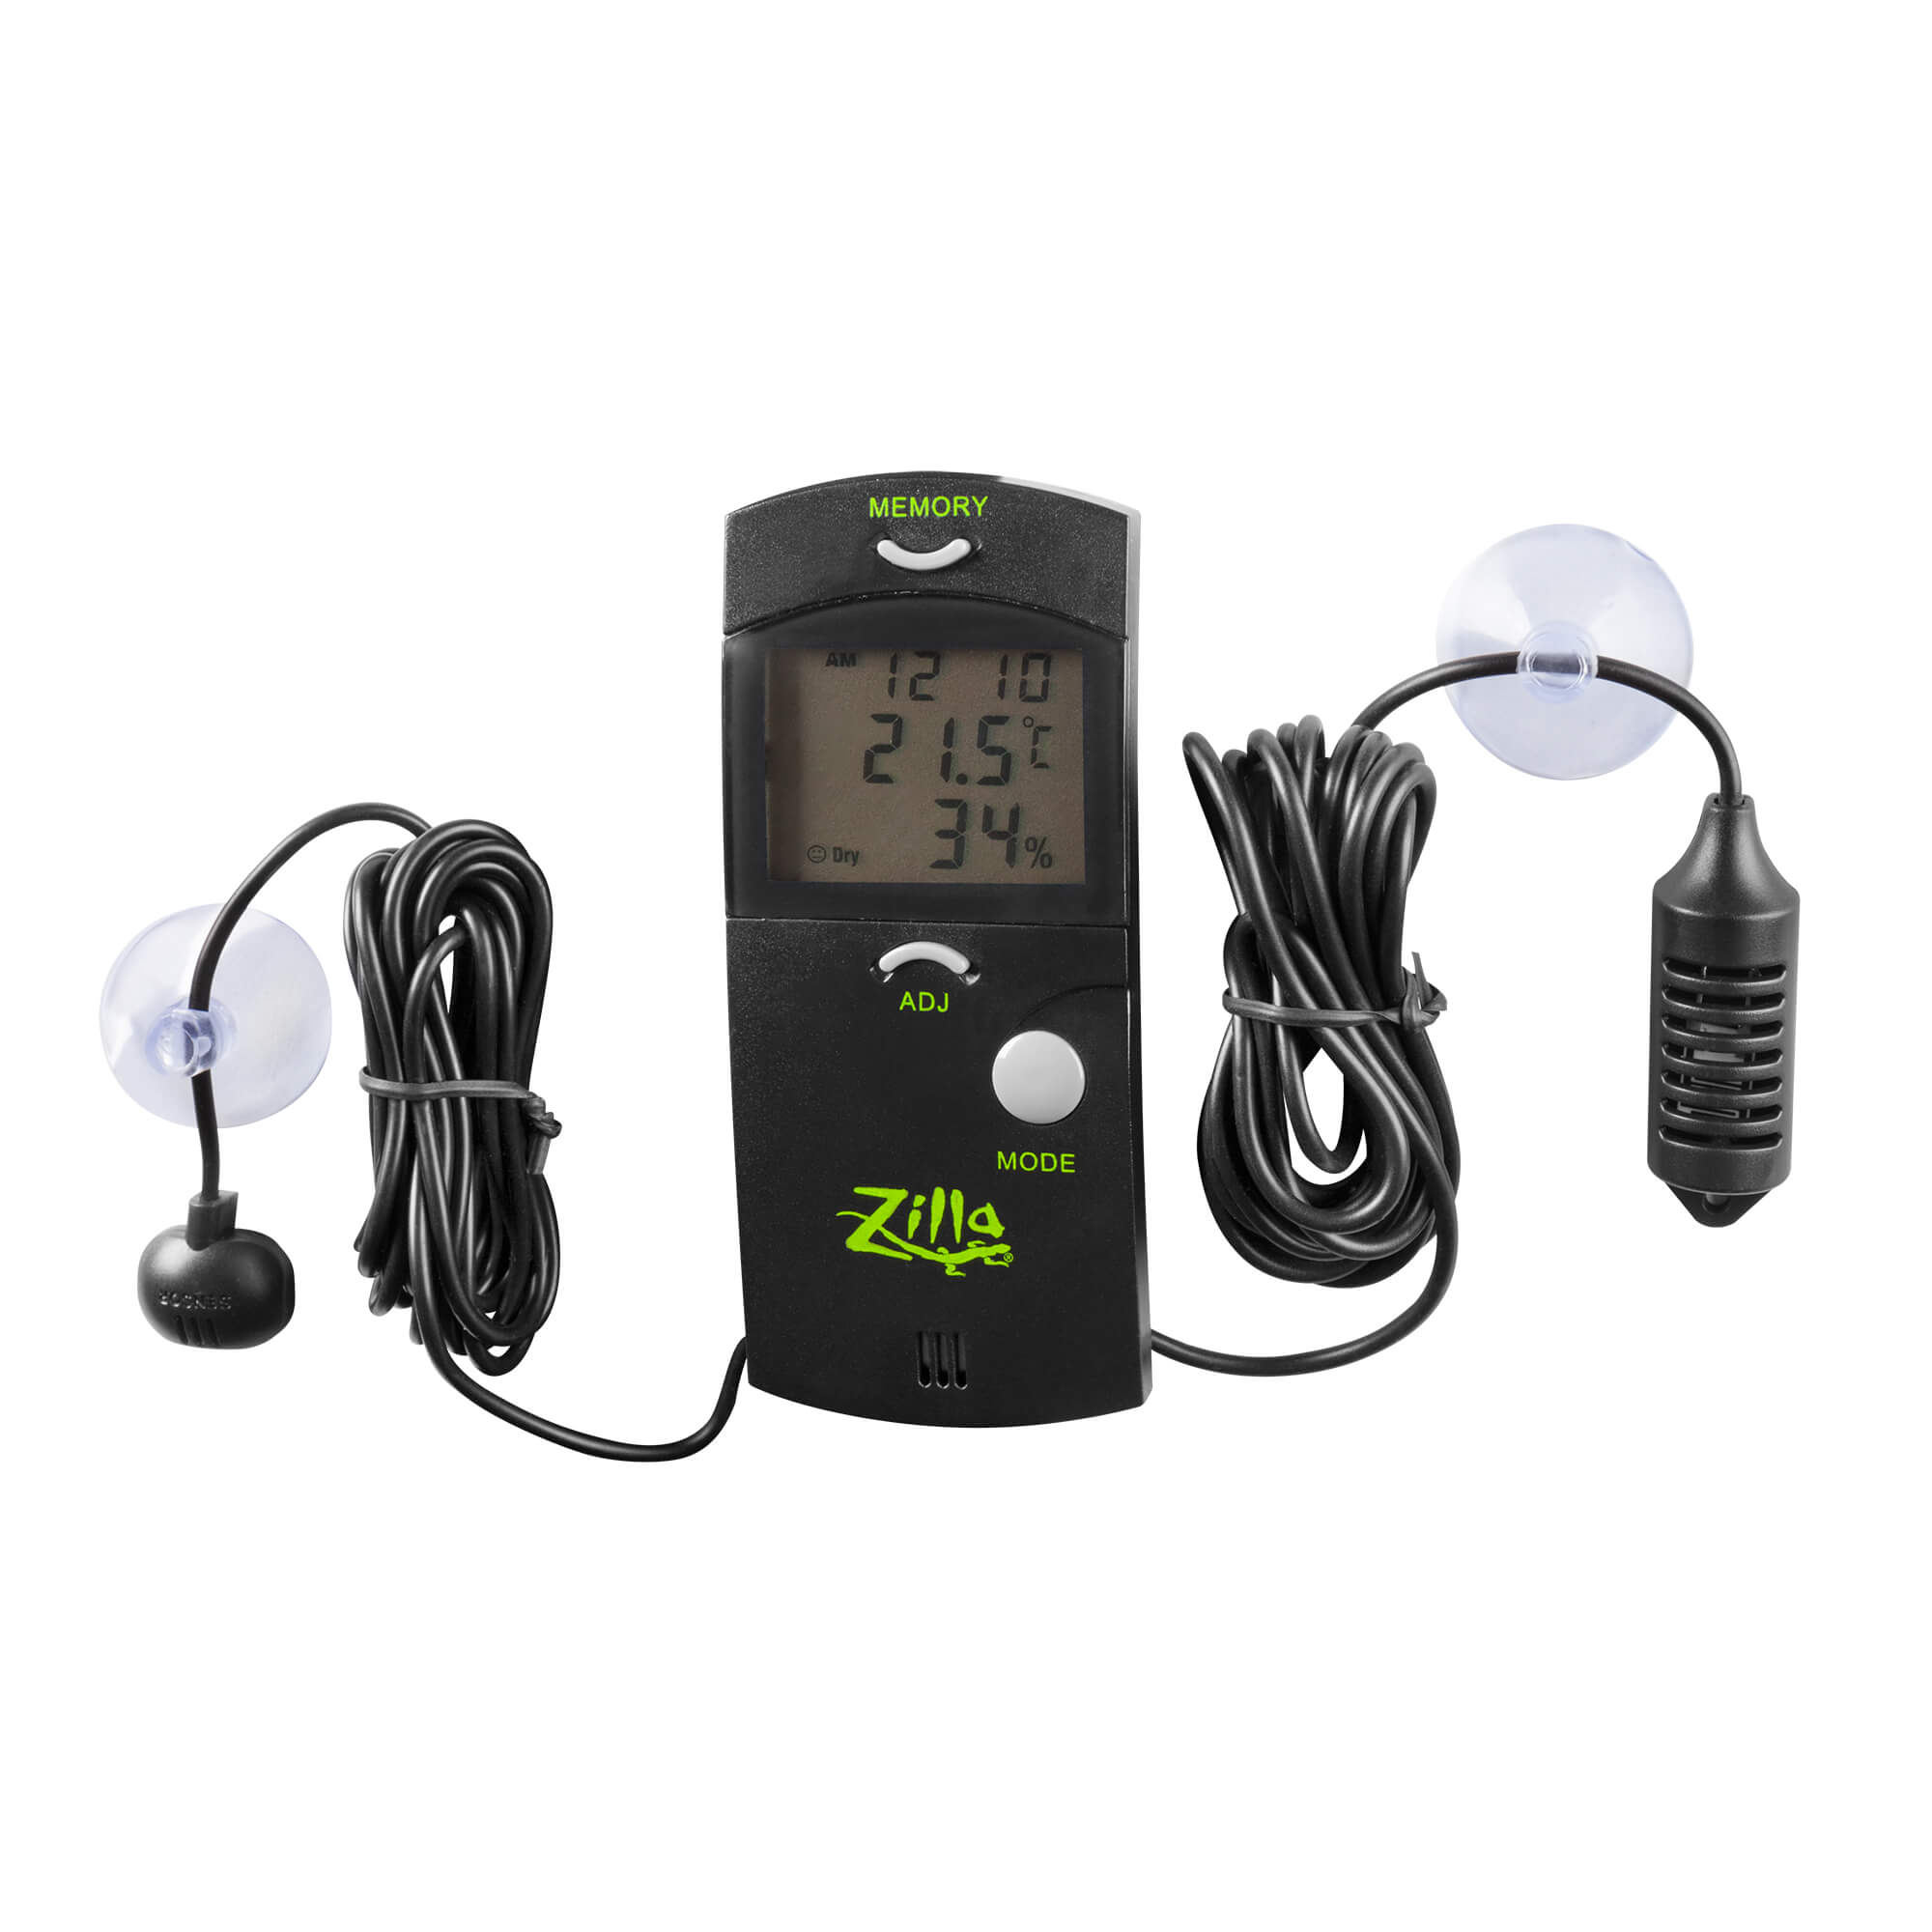 https://www.zillarules.com/-/media/Project/OneWeb/Zilla/Images/products-homepage/product-images/Environmental-control/TerrariumThermometerHygrometer/096316680289pt01.jpg